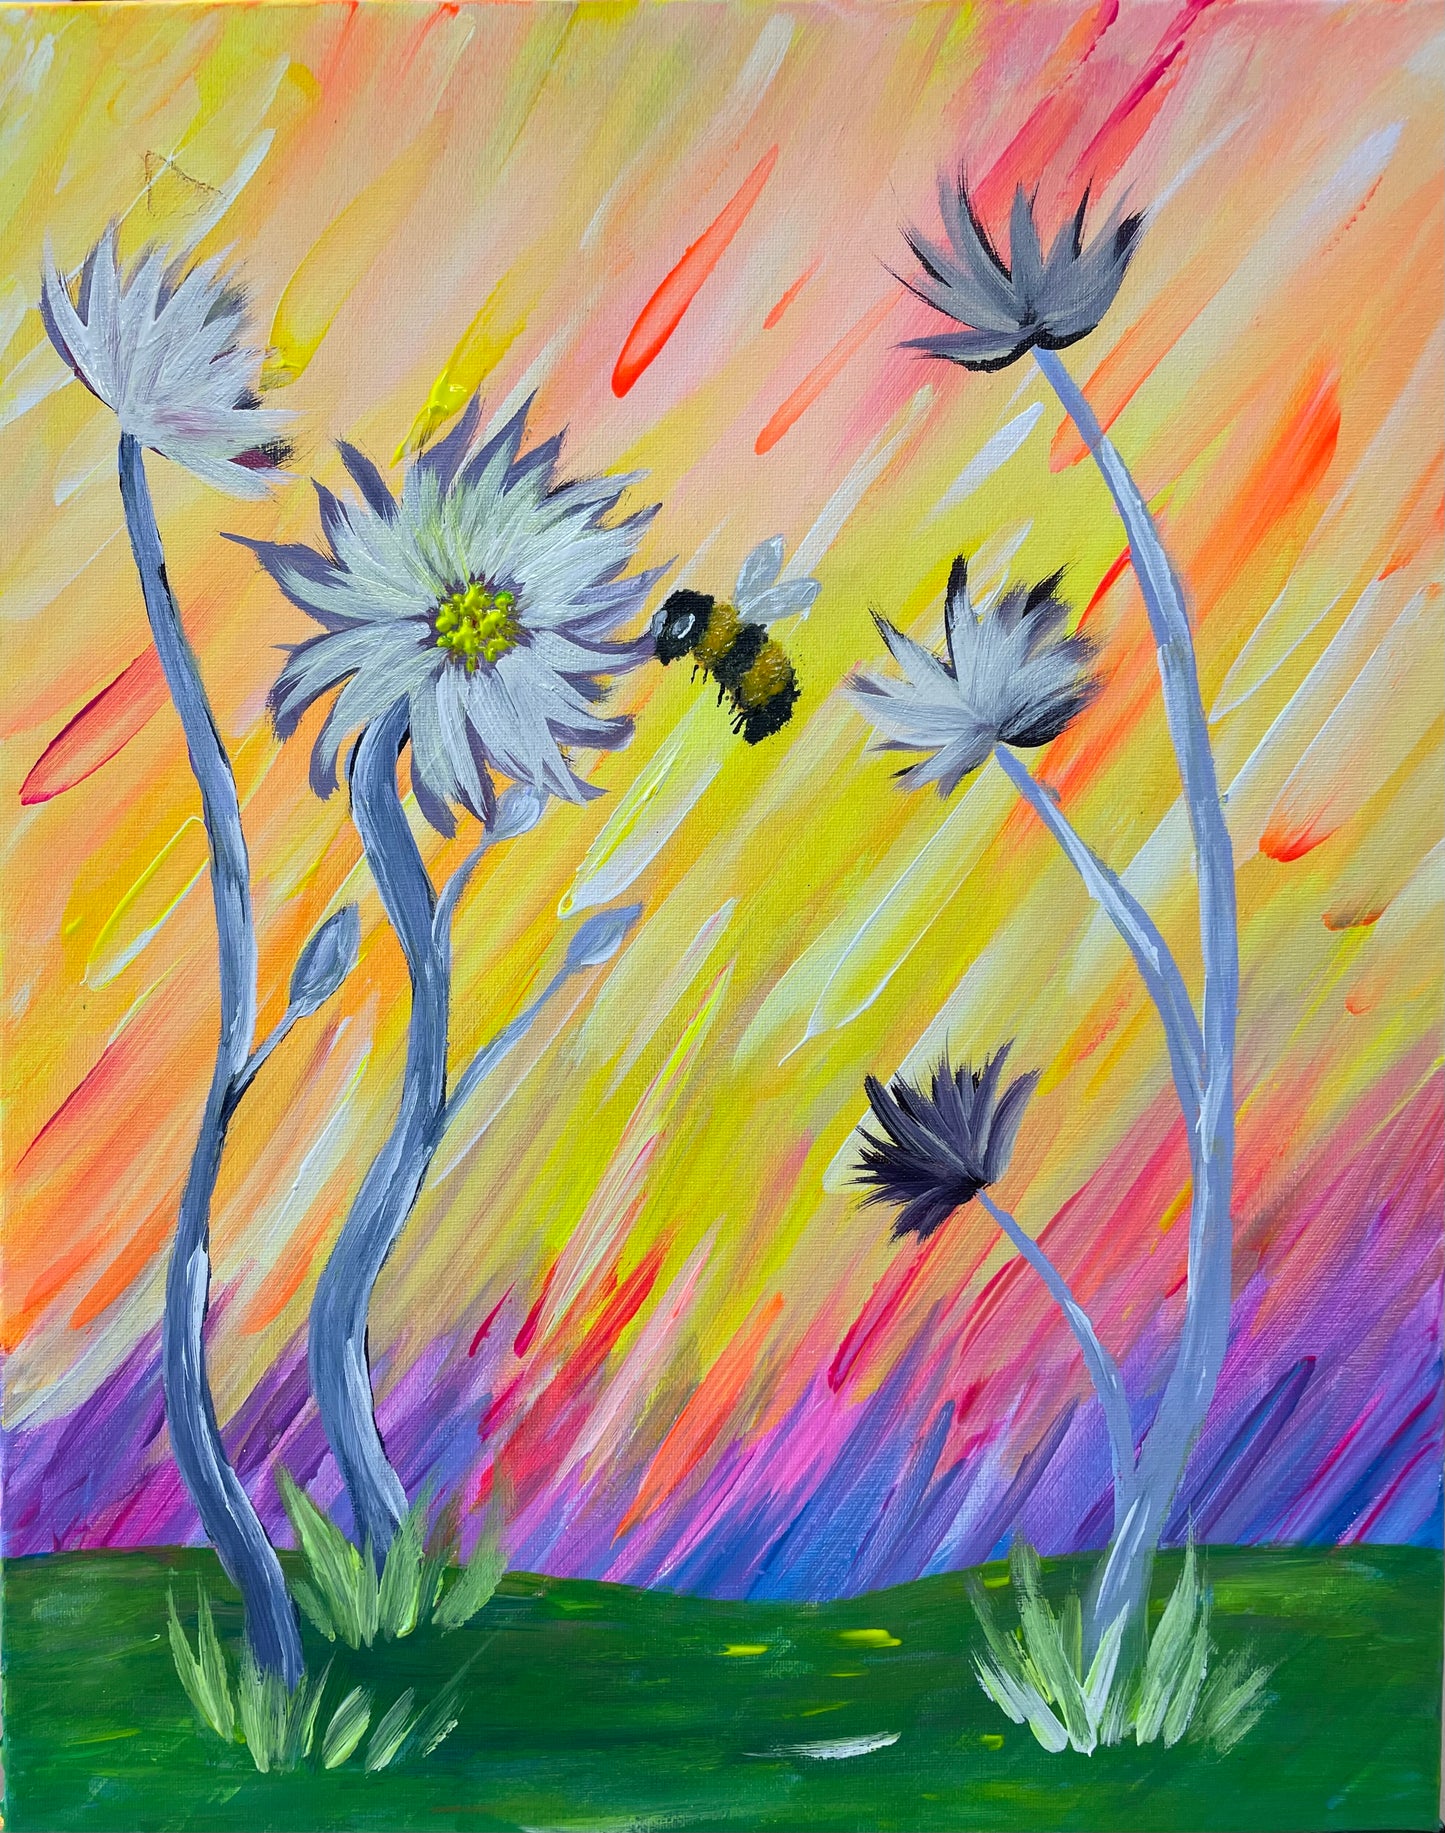 Sat, Jan 29, 12-2P "Busy Bee" Private Houston Kids Painting Party